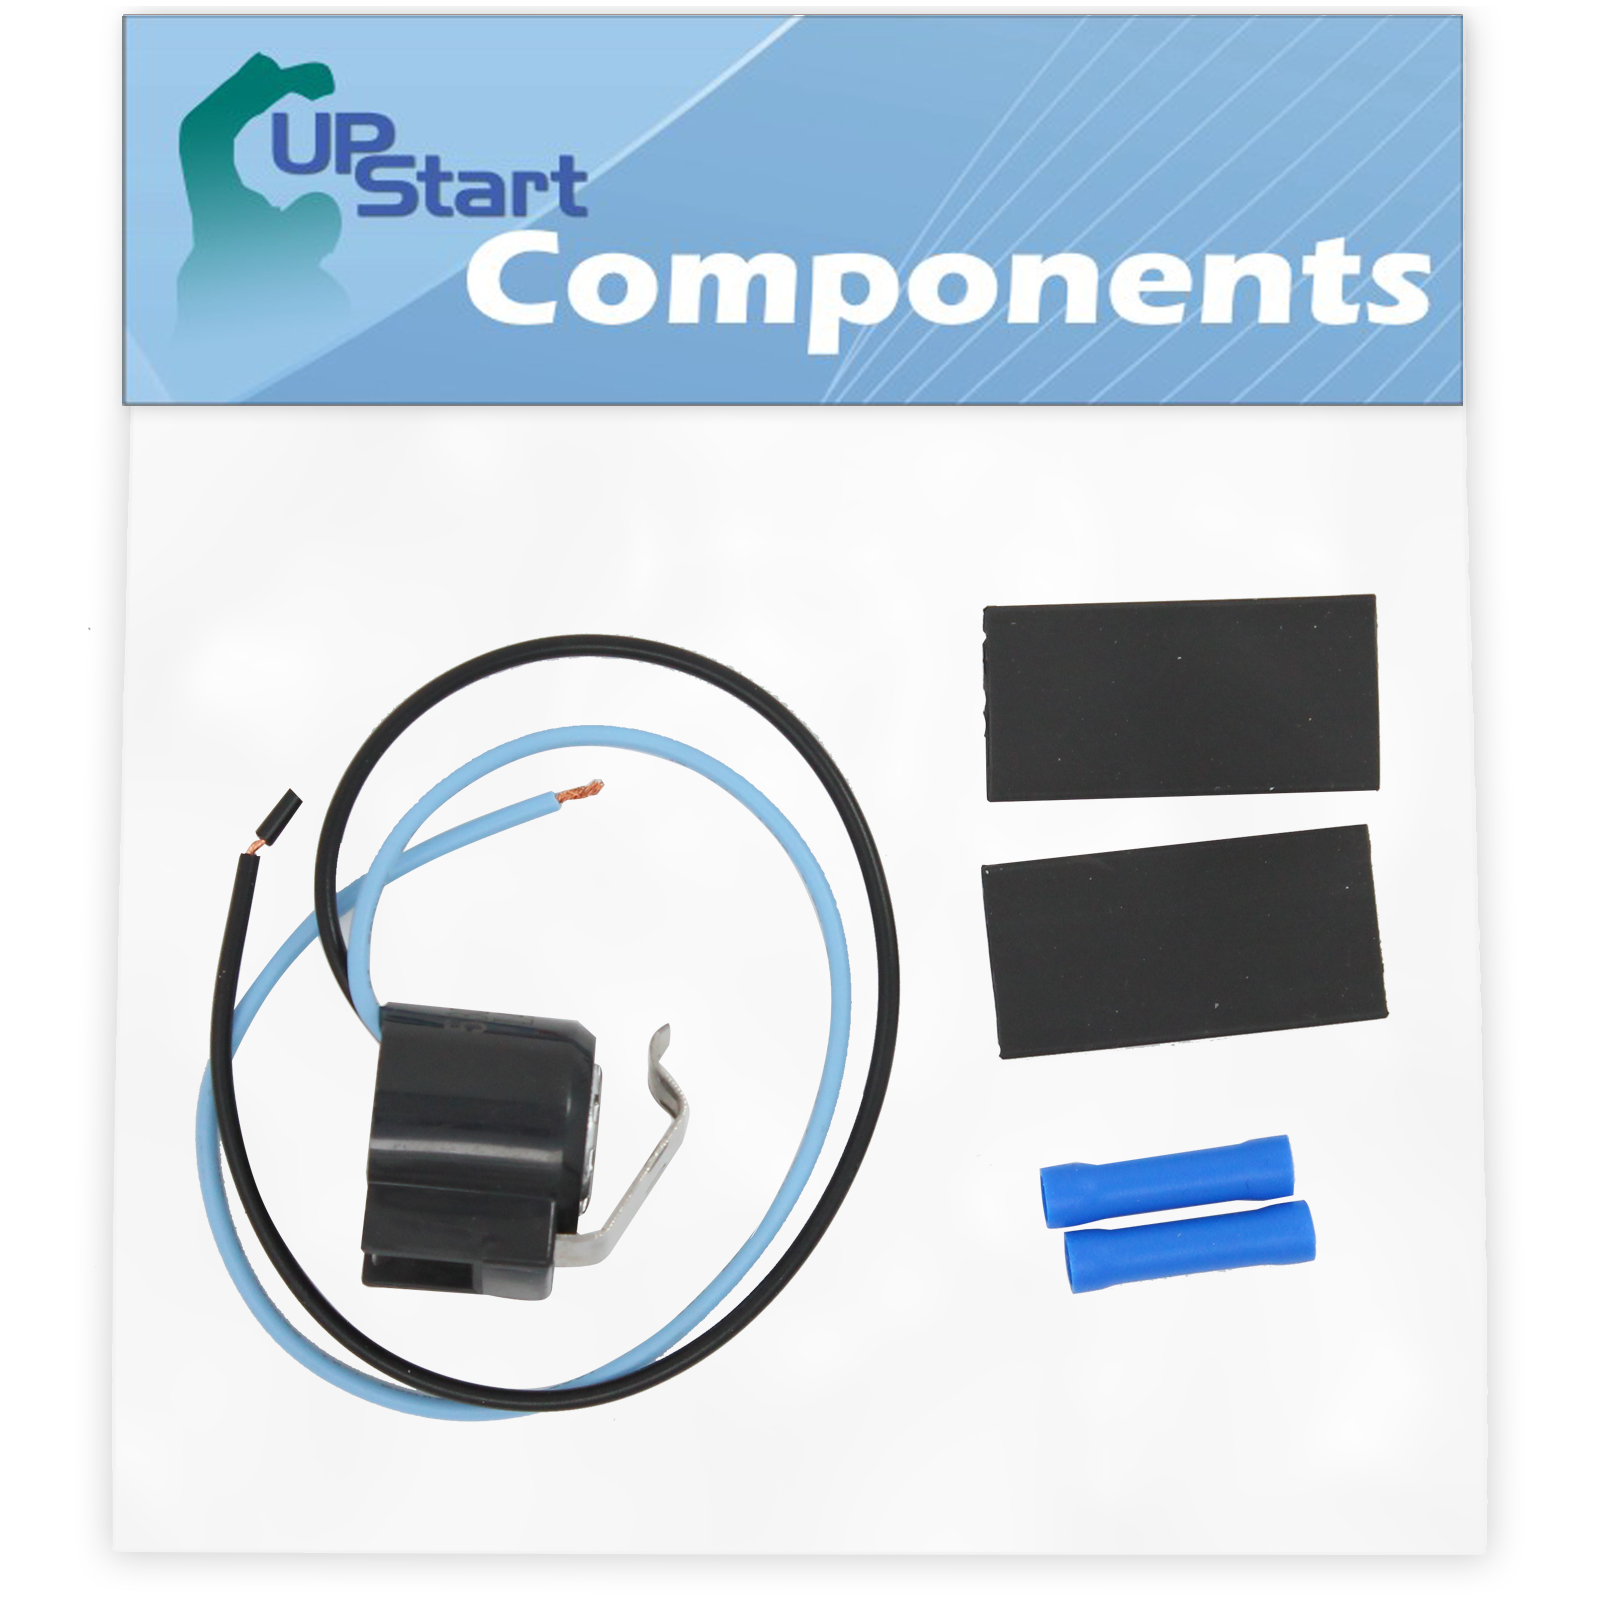 5303918214 Defrost Thermostat Replacement for Frigidaire GLHS66EFSB3 Refrigerator - Compatible with 5303918214 Defrost Thermostat Kit - UpStart Components Brand - image 1 of 2